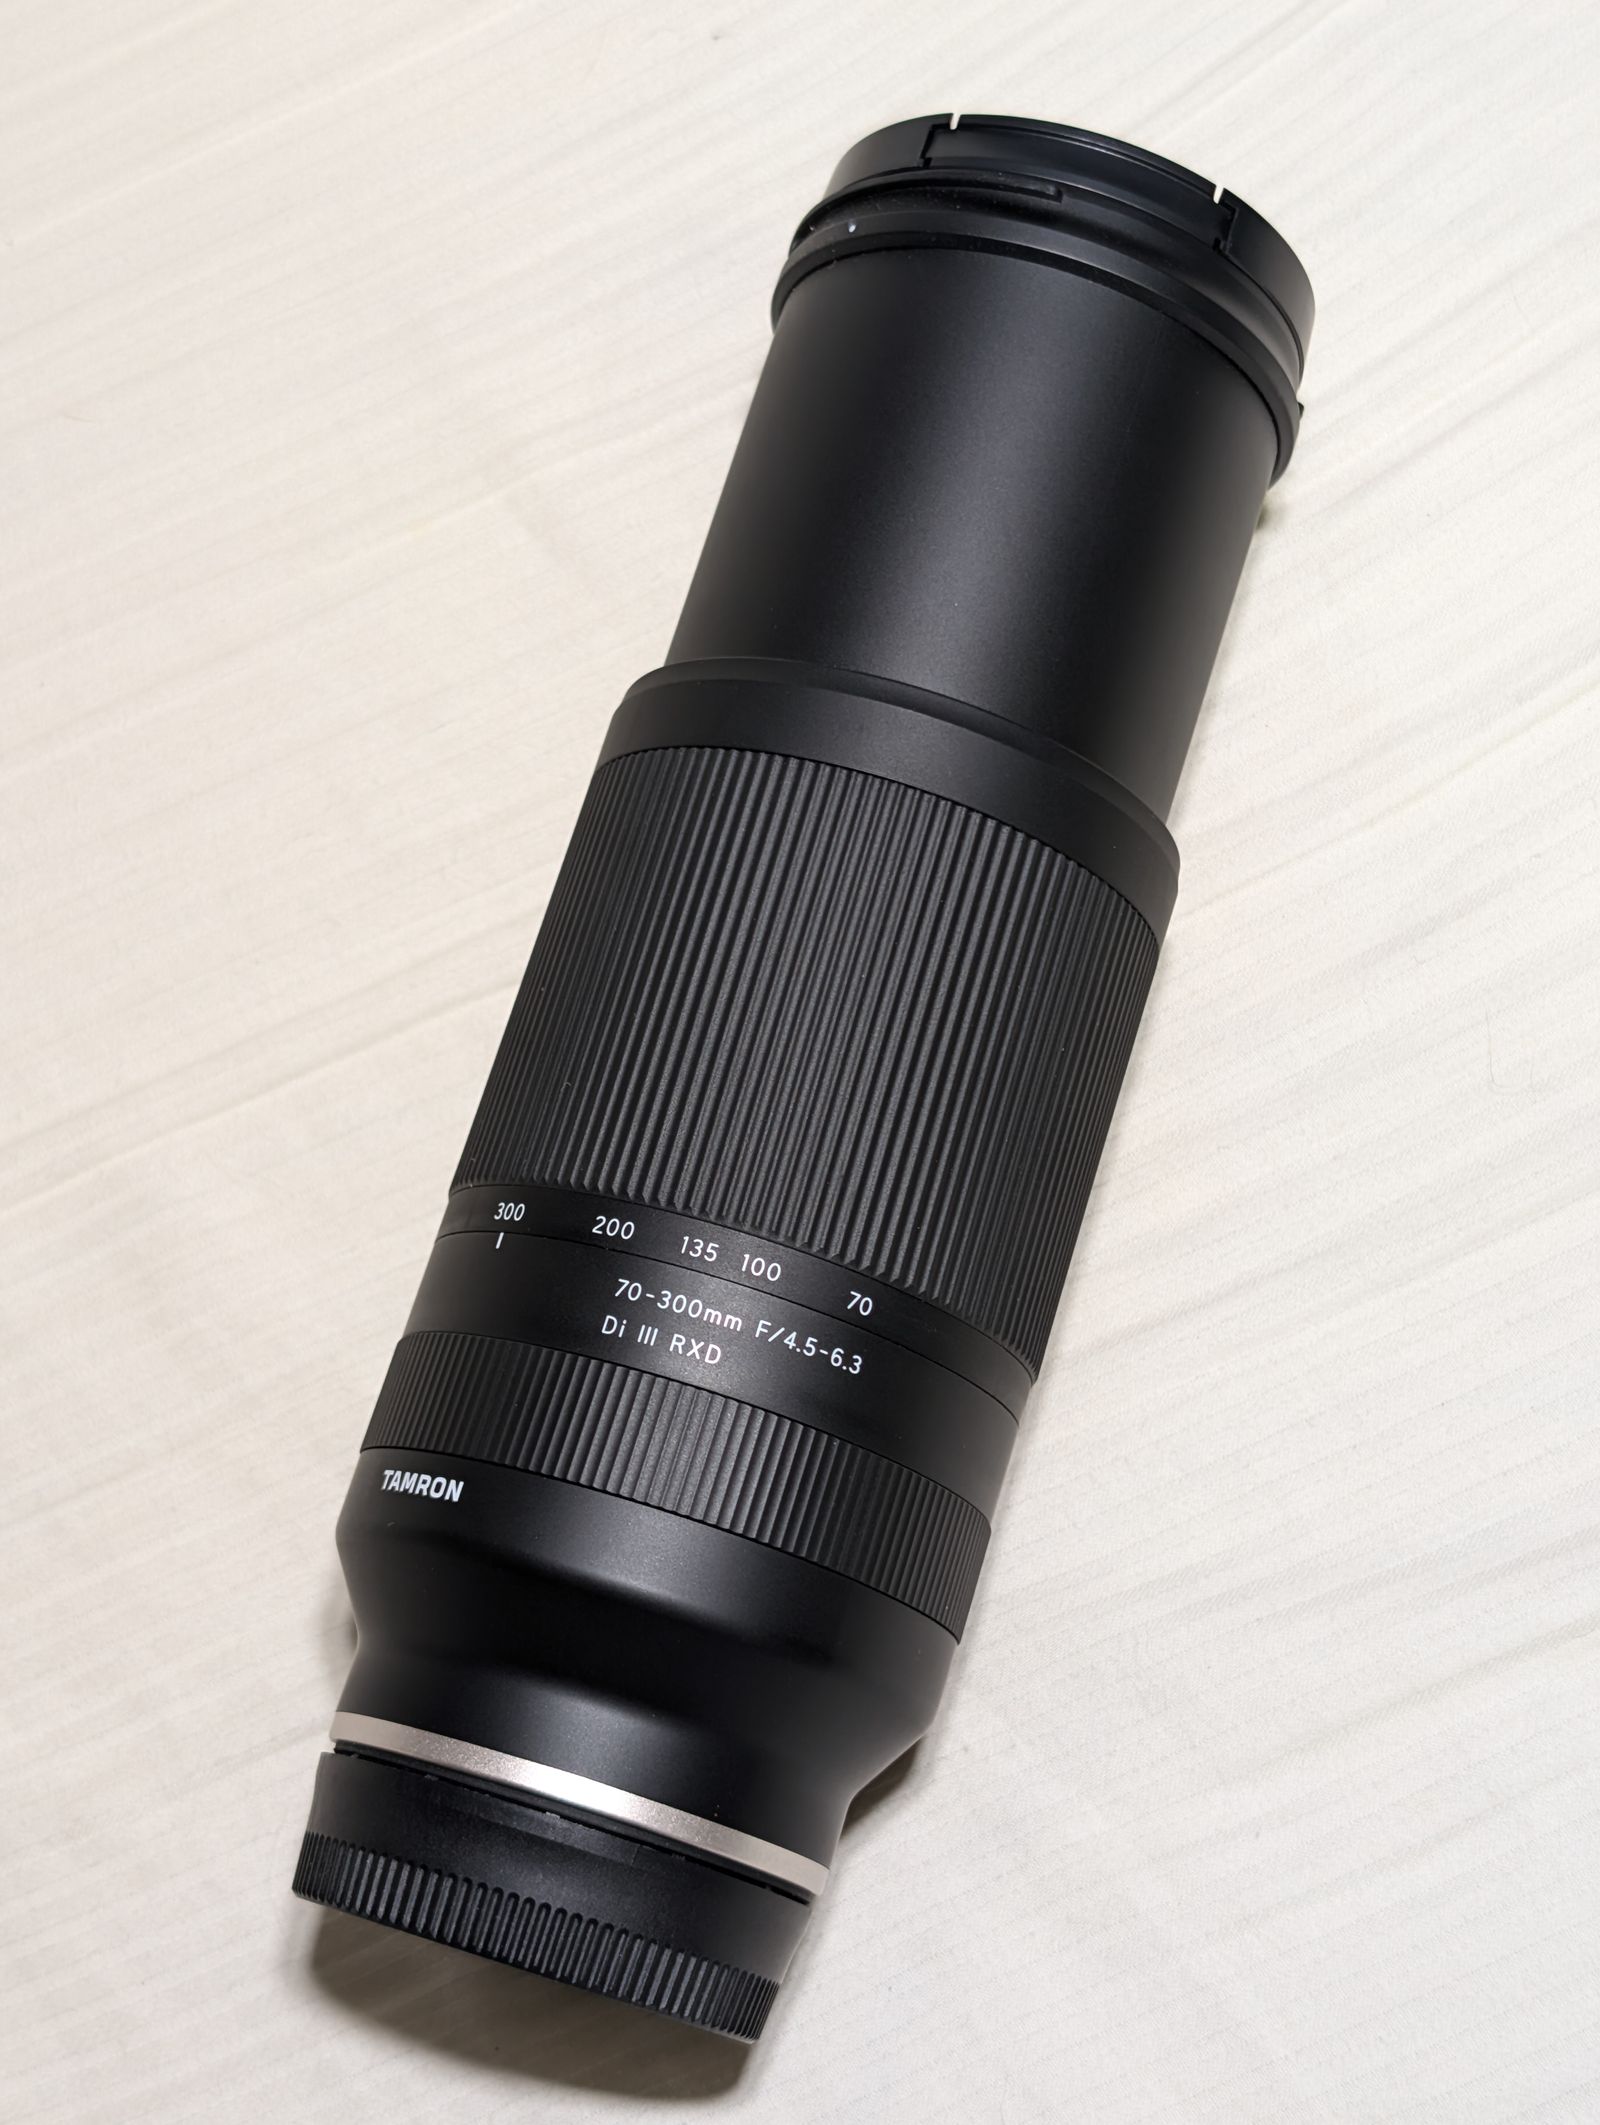 Tamron 70-300 F/4.5-6.3 Di III RXD Sony E Mount From Backroom Gems On Gear  Focus